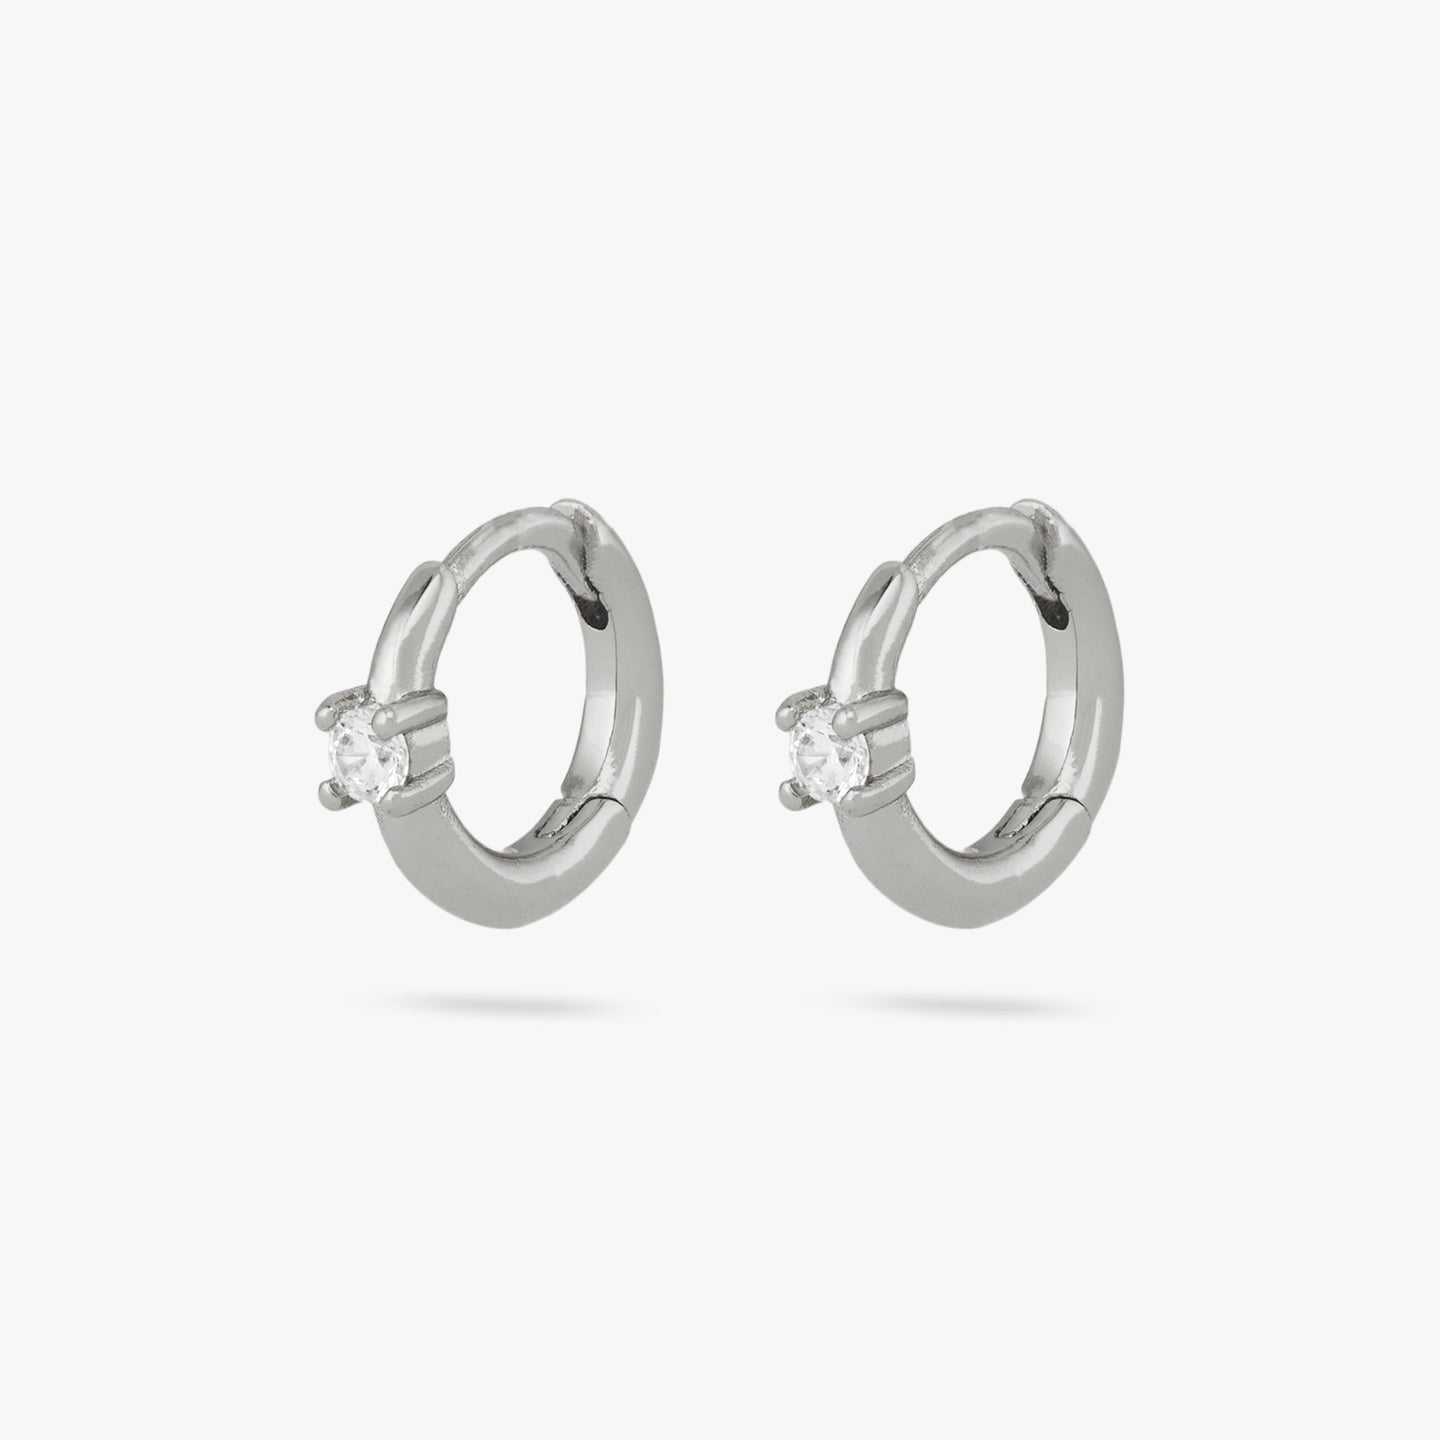 This is a pair of small silver huggies with clear cz details [pair] color:null|silver/clear